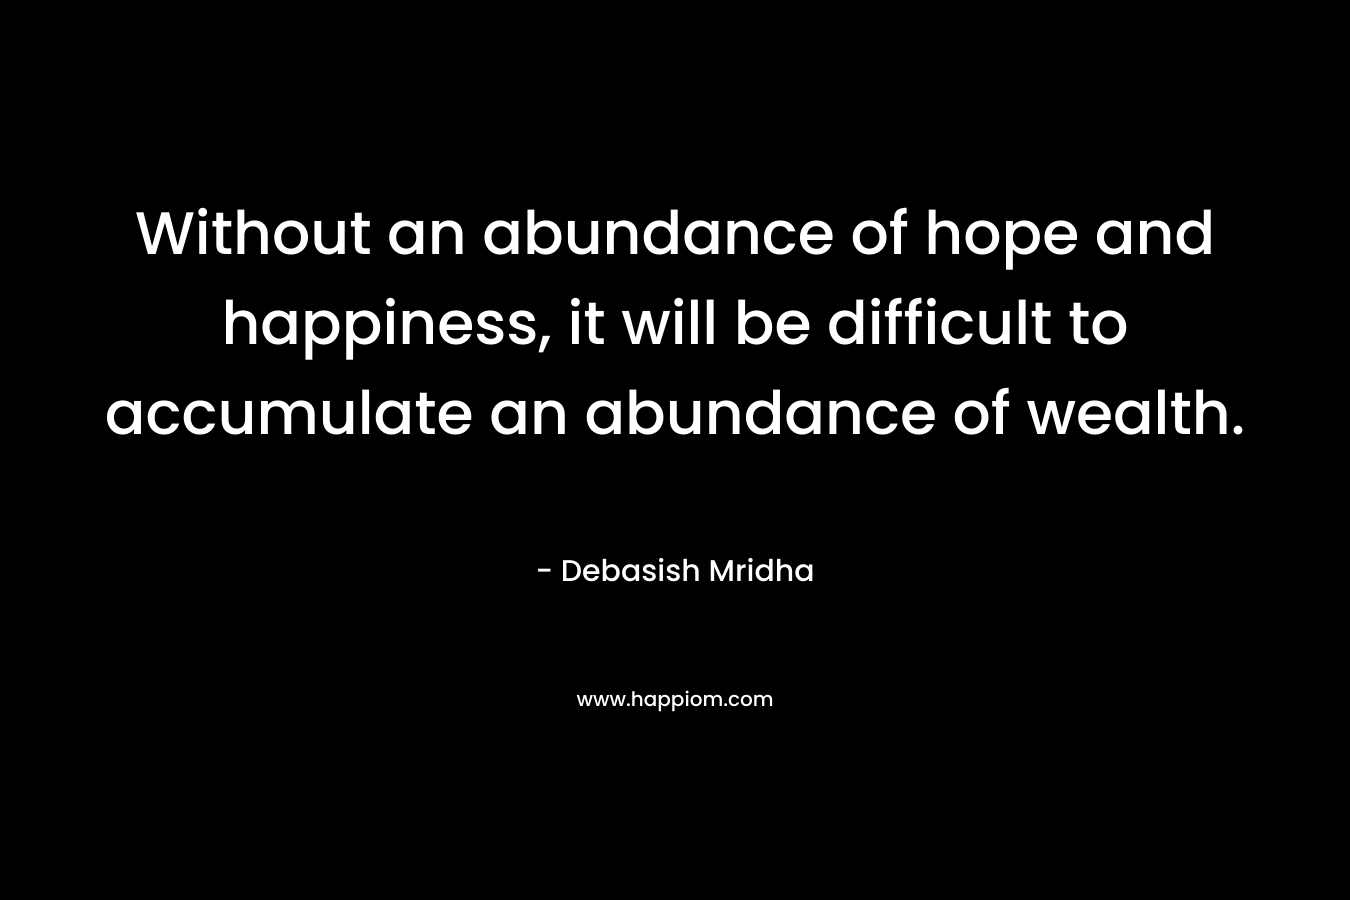 Without an abundance of hope and happiness, it will be difficult to accumulate an abundance of wealth.